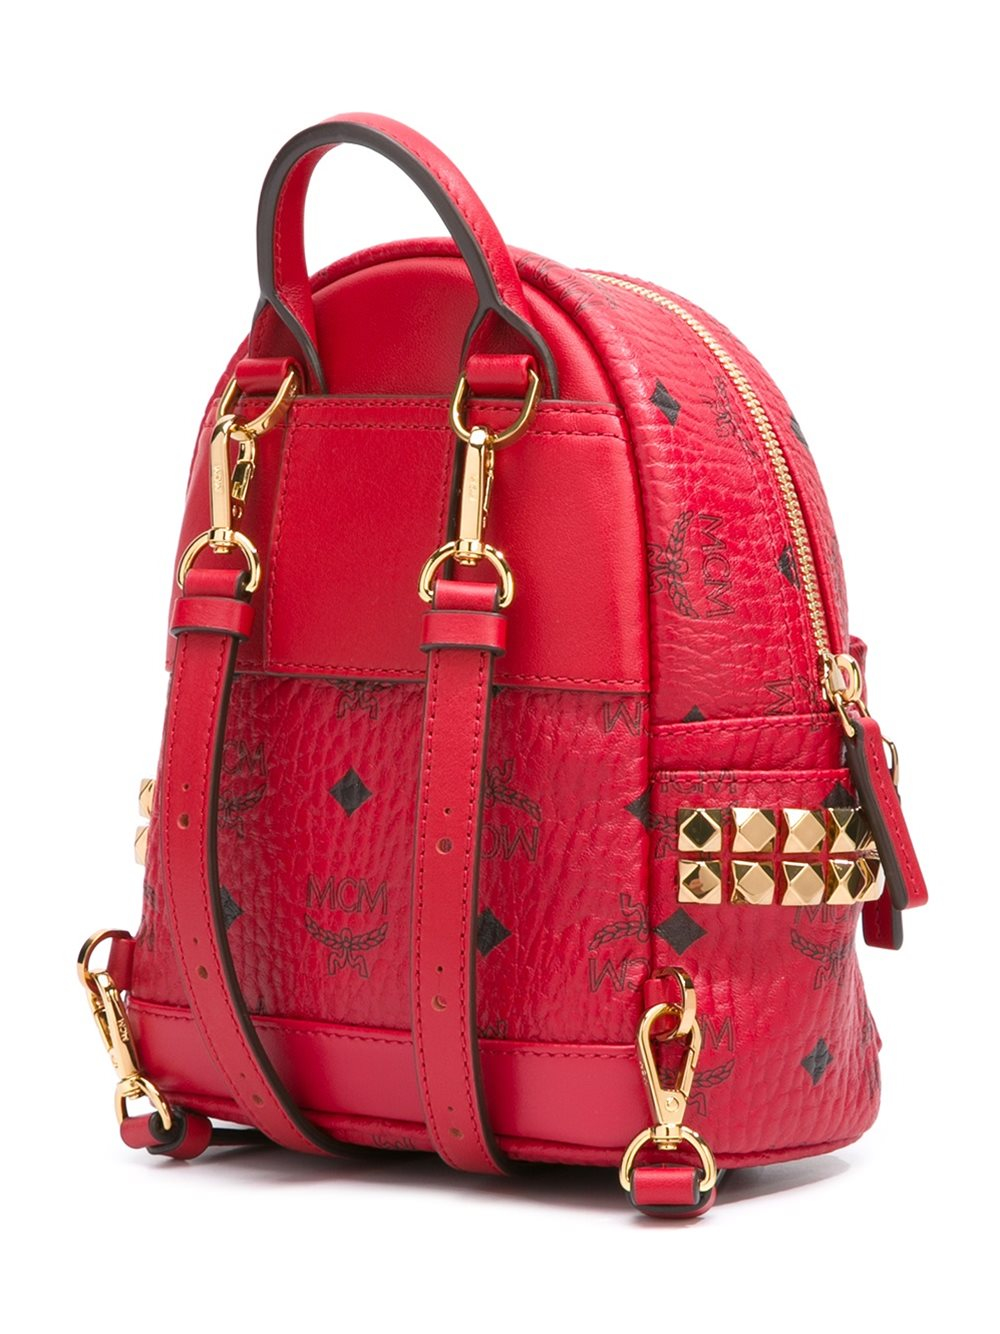 Mcm Gold-tone Hardware Small Backpack in Red | Lyst